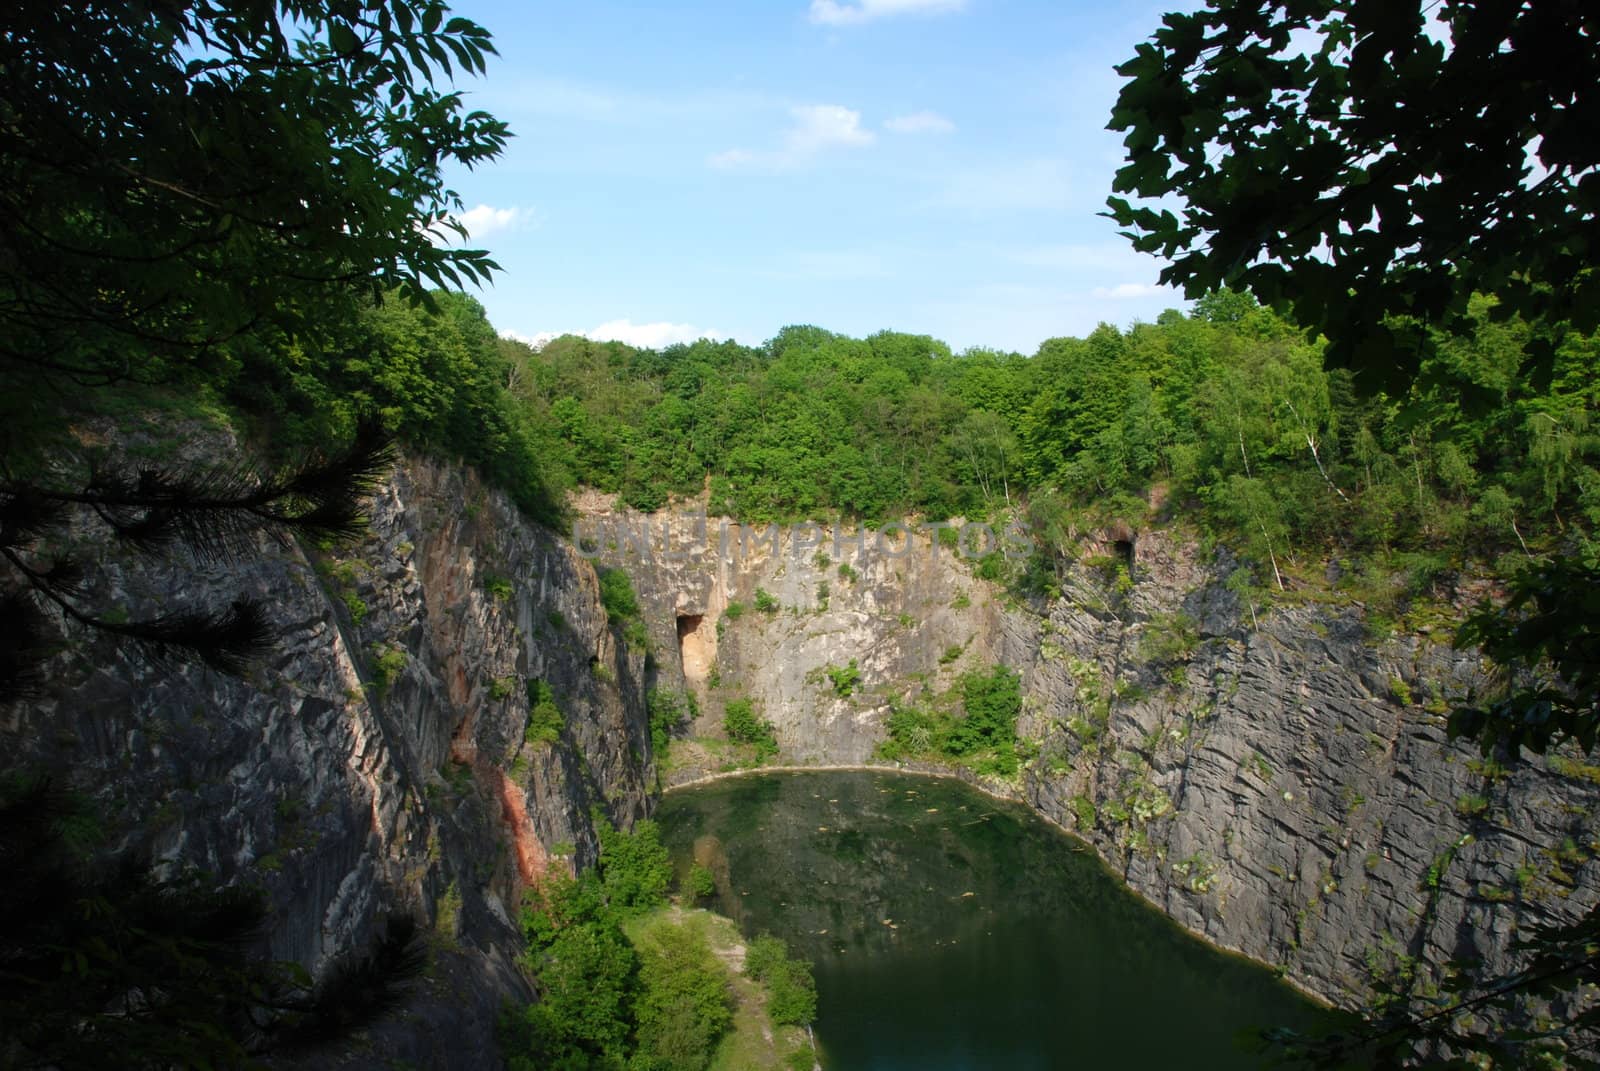 Beautiful old flooded quarry called Small America in the Czech Republic